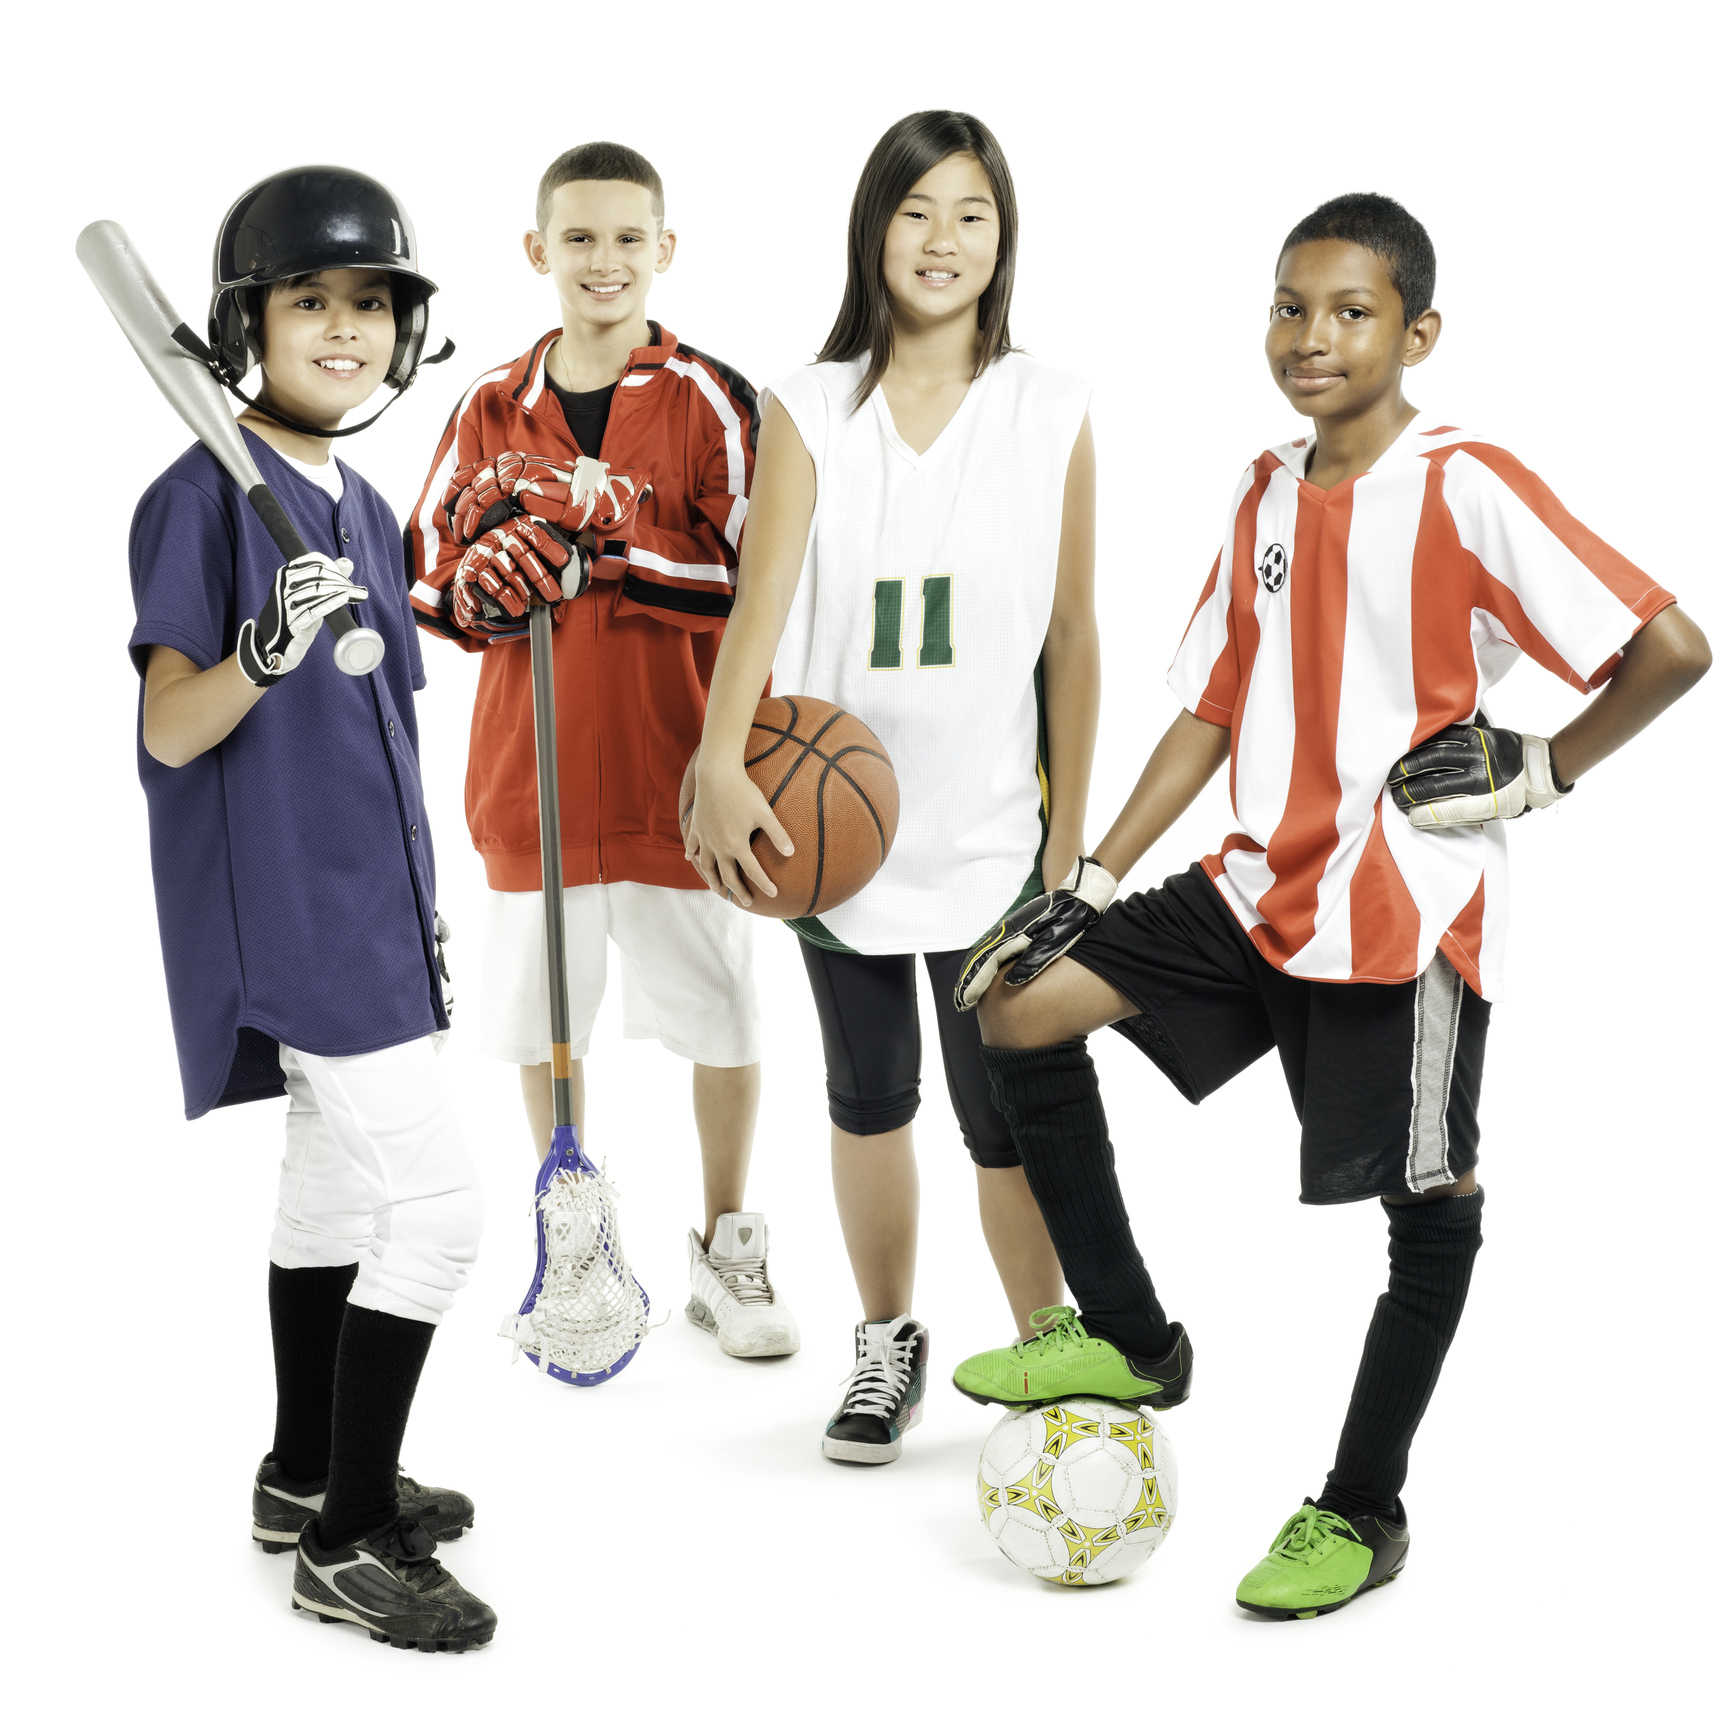 Sports Specialization vs. Multiple Sports: What's Better?